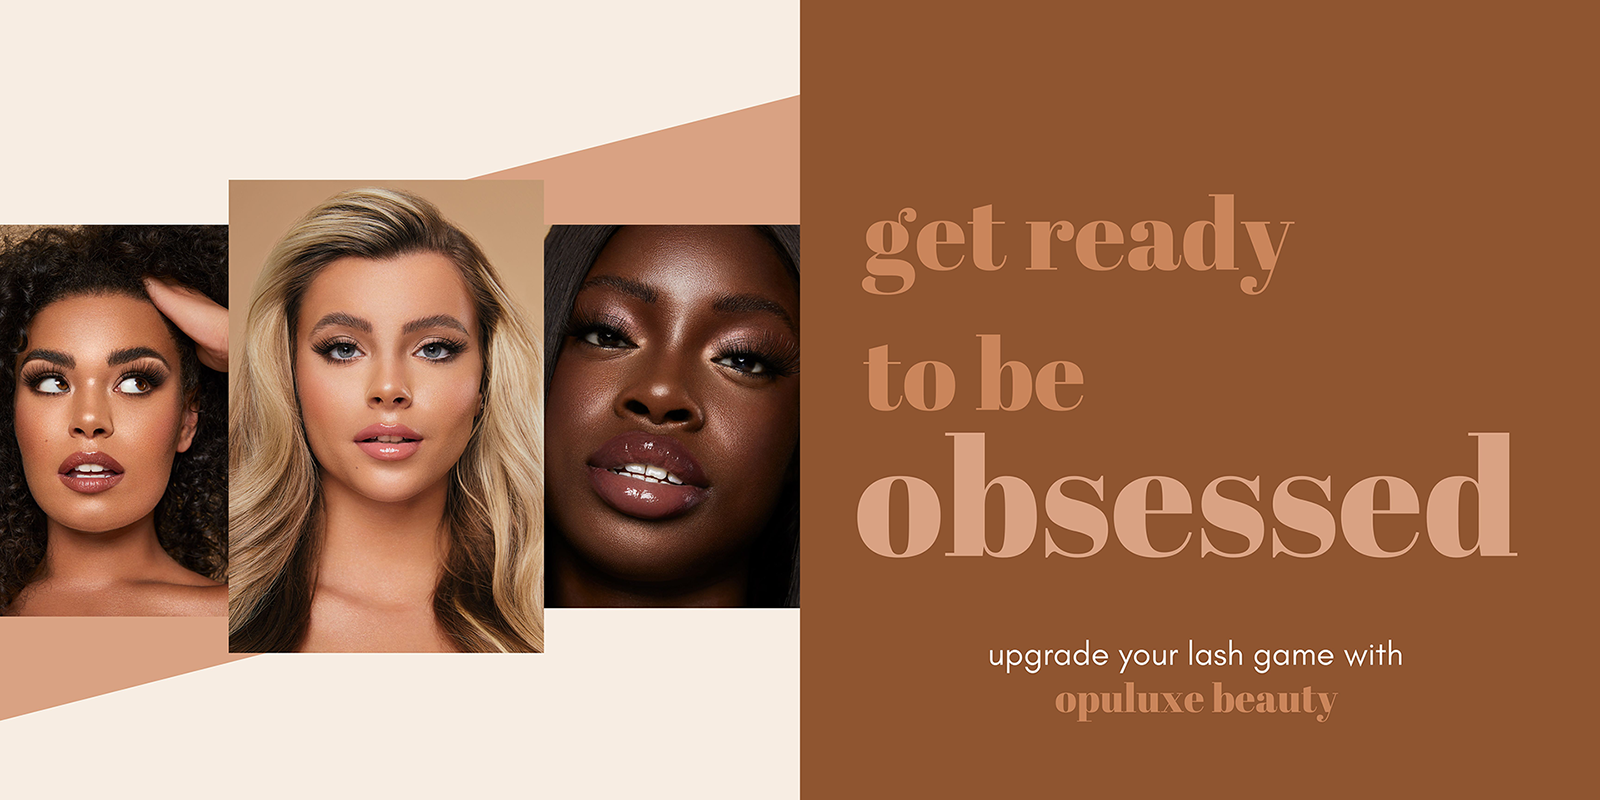 get ready to be obsessed website homepage banner